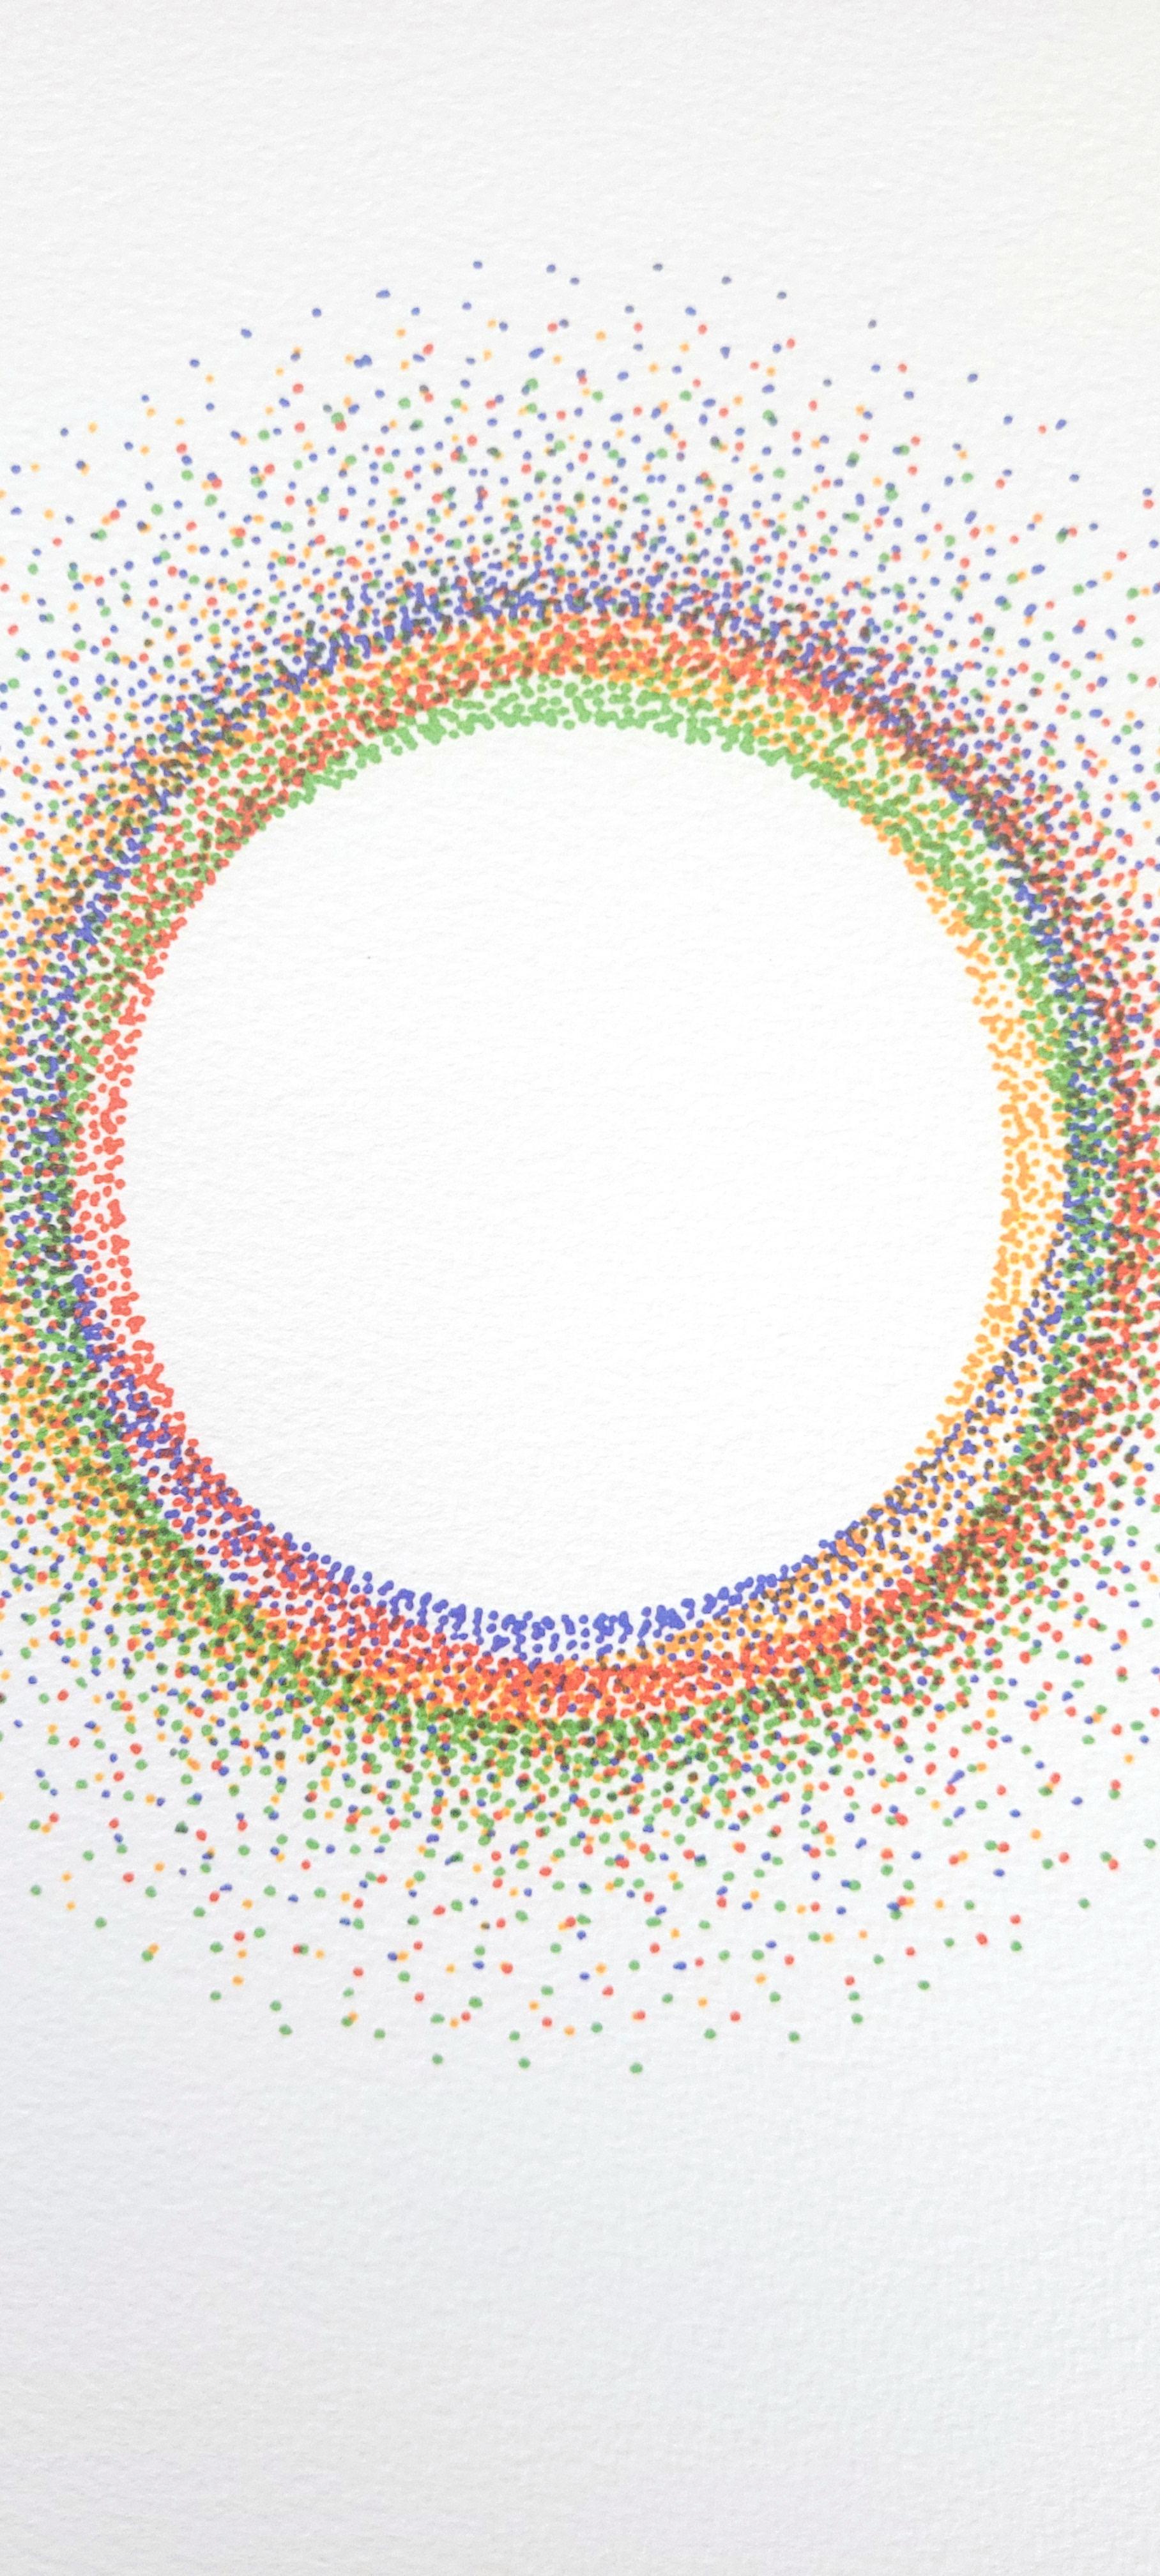 Signed and numbered art print by Julio Le Parc from the series 